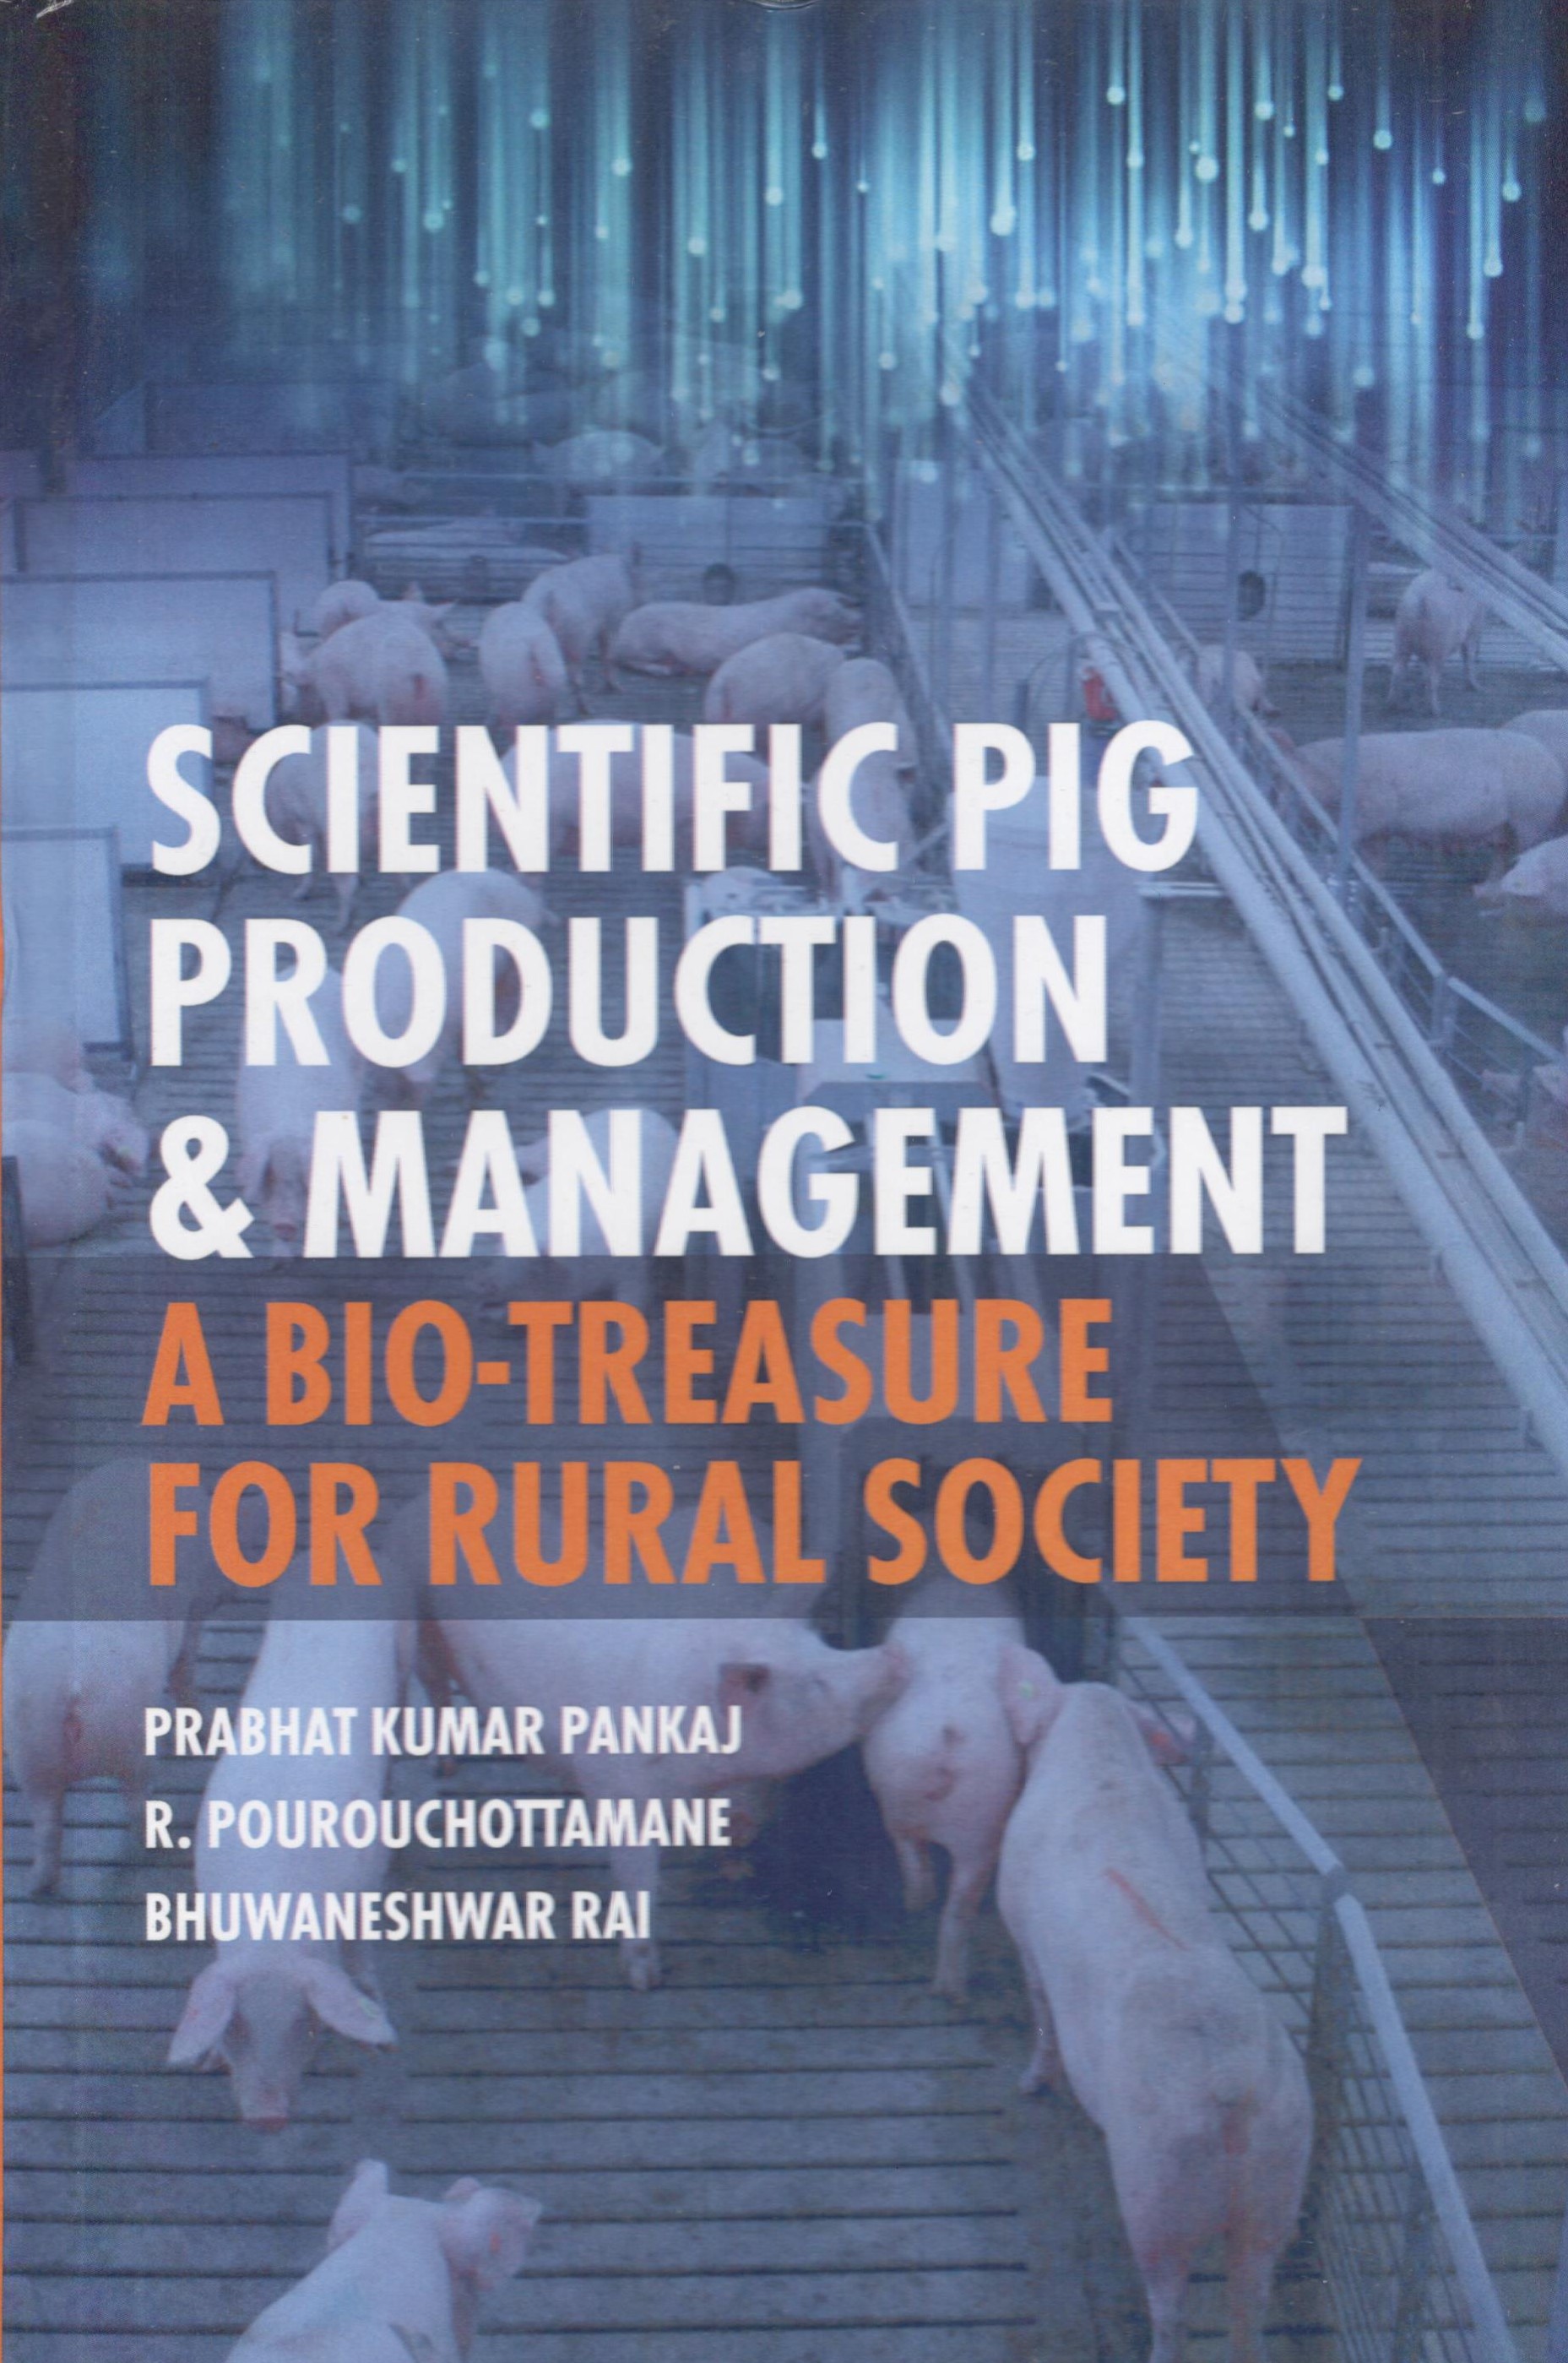 Scientific Pig Production & Management A Bio-Treasure for Rural Society